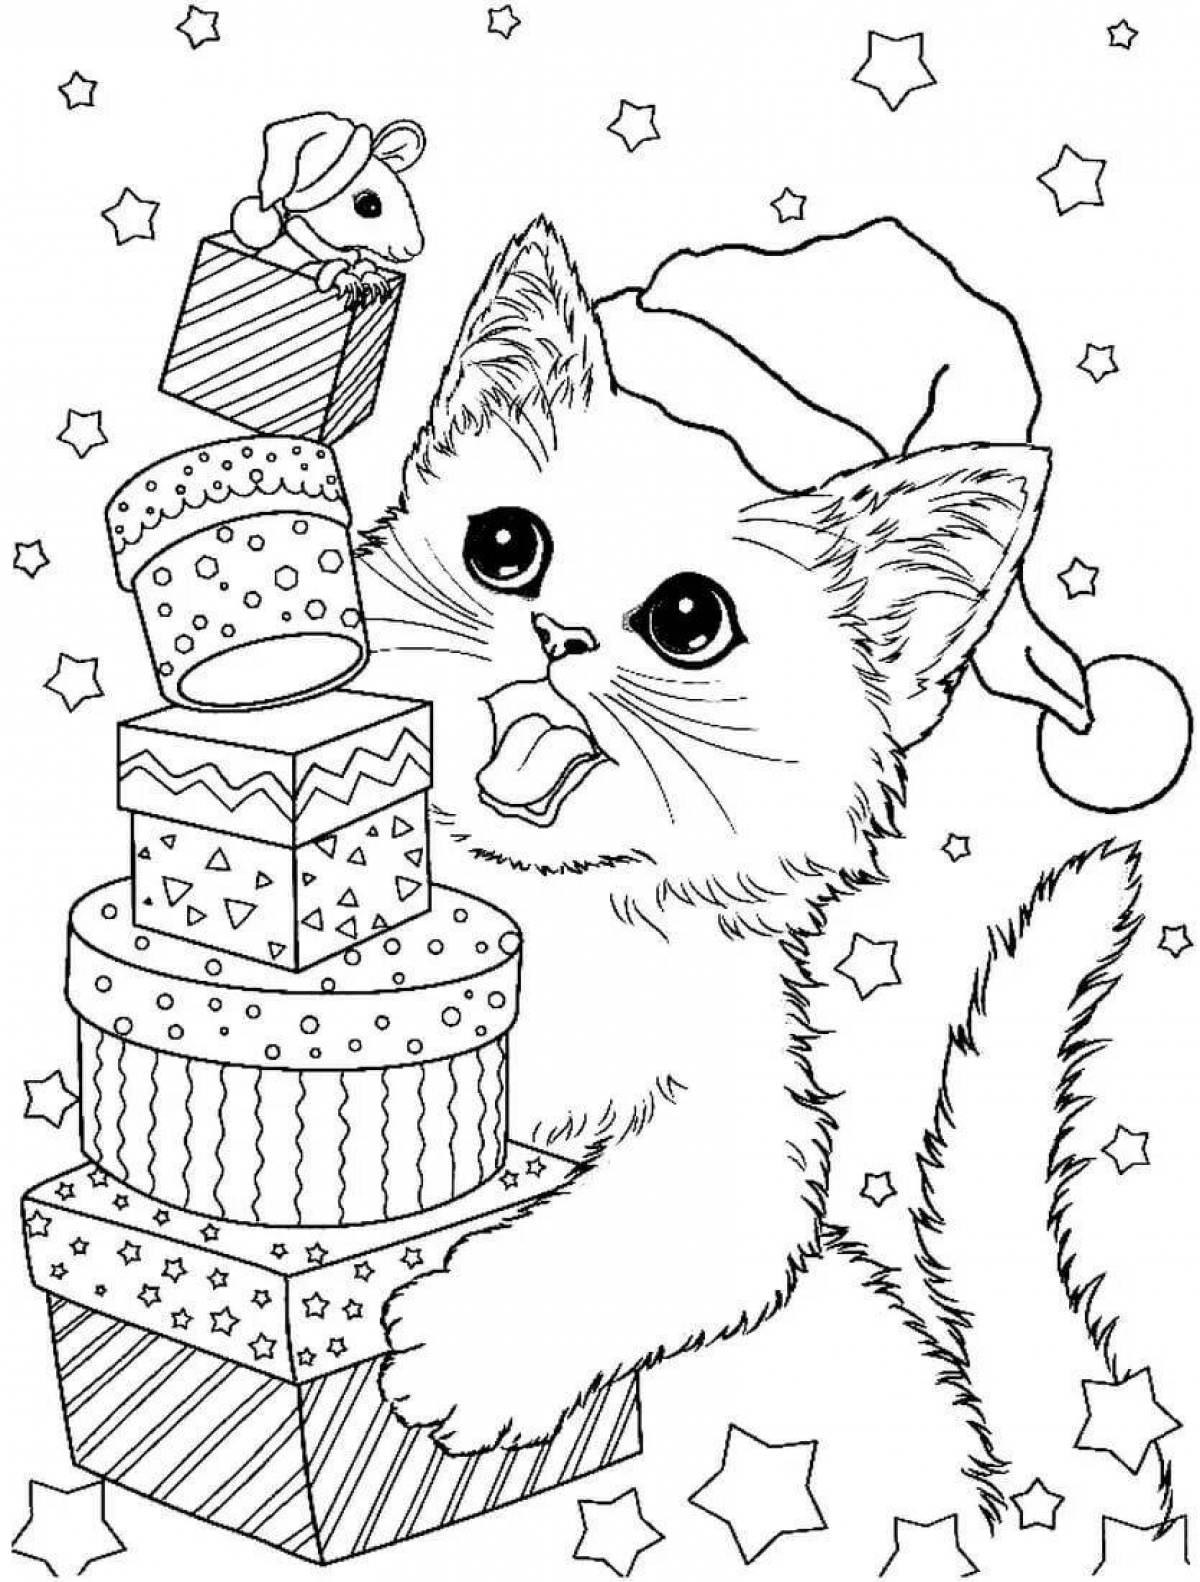 Crazy coloring book for 12 year old girls with cute cats